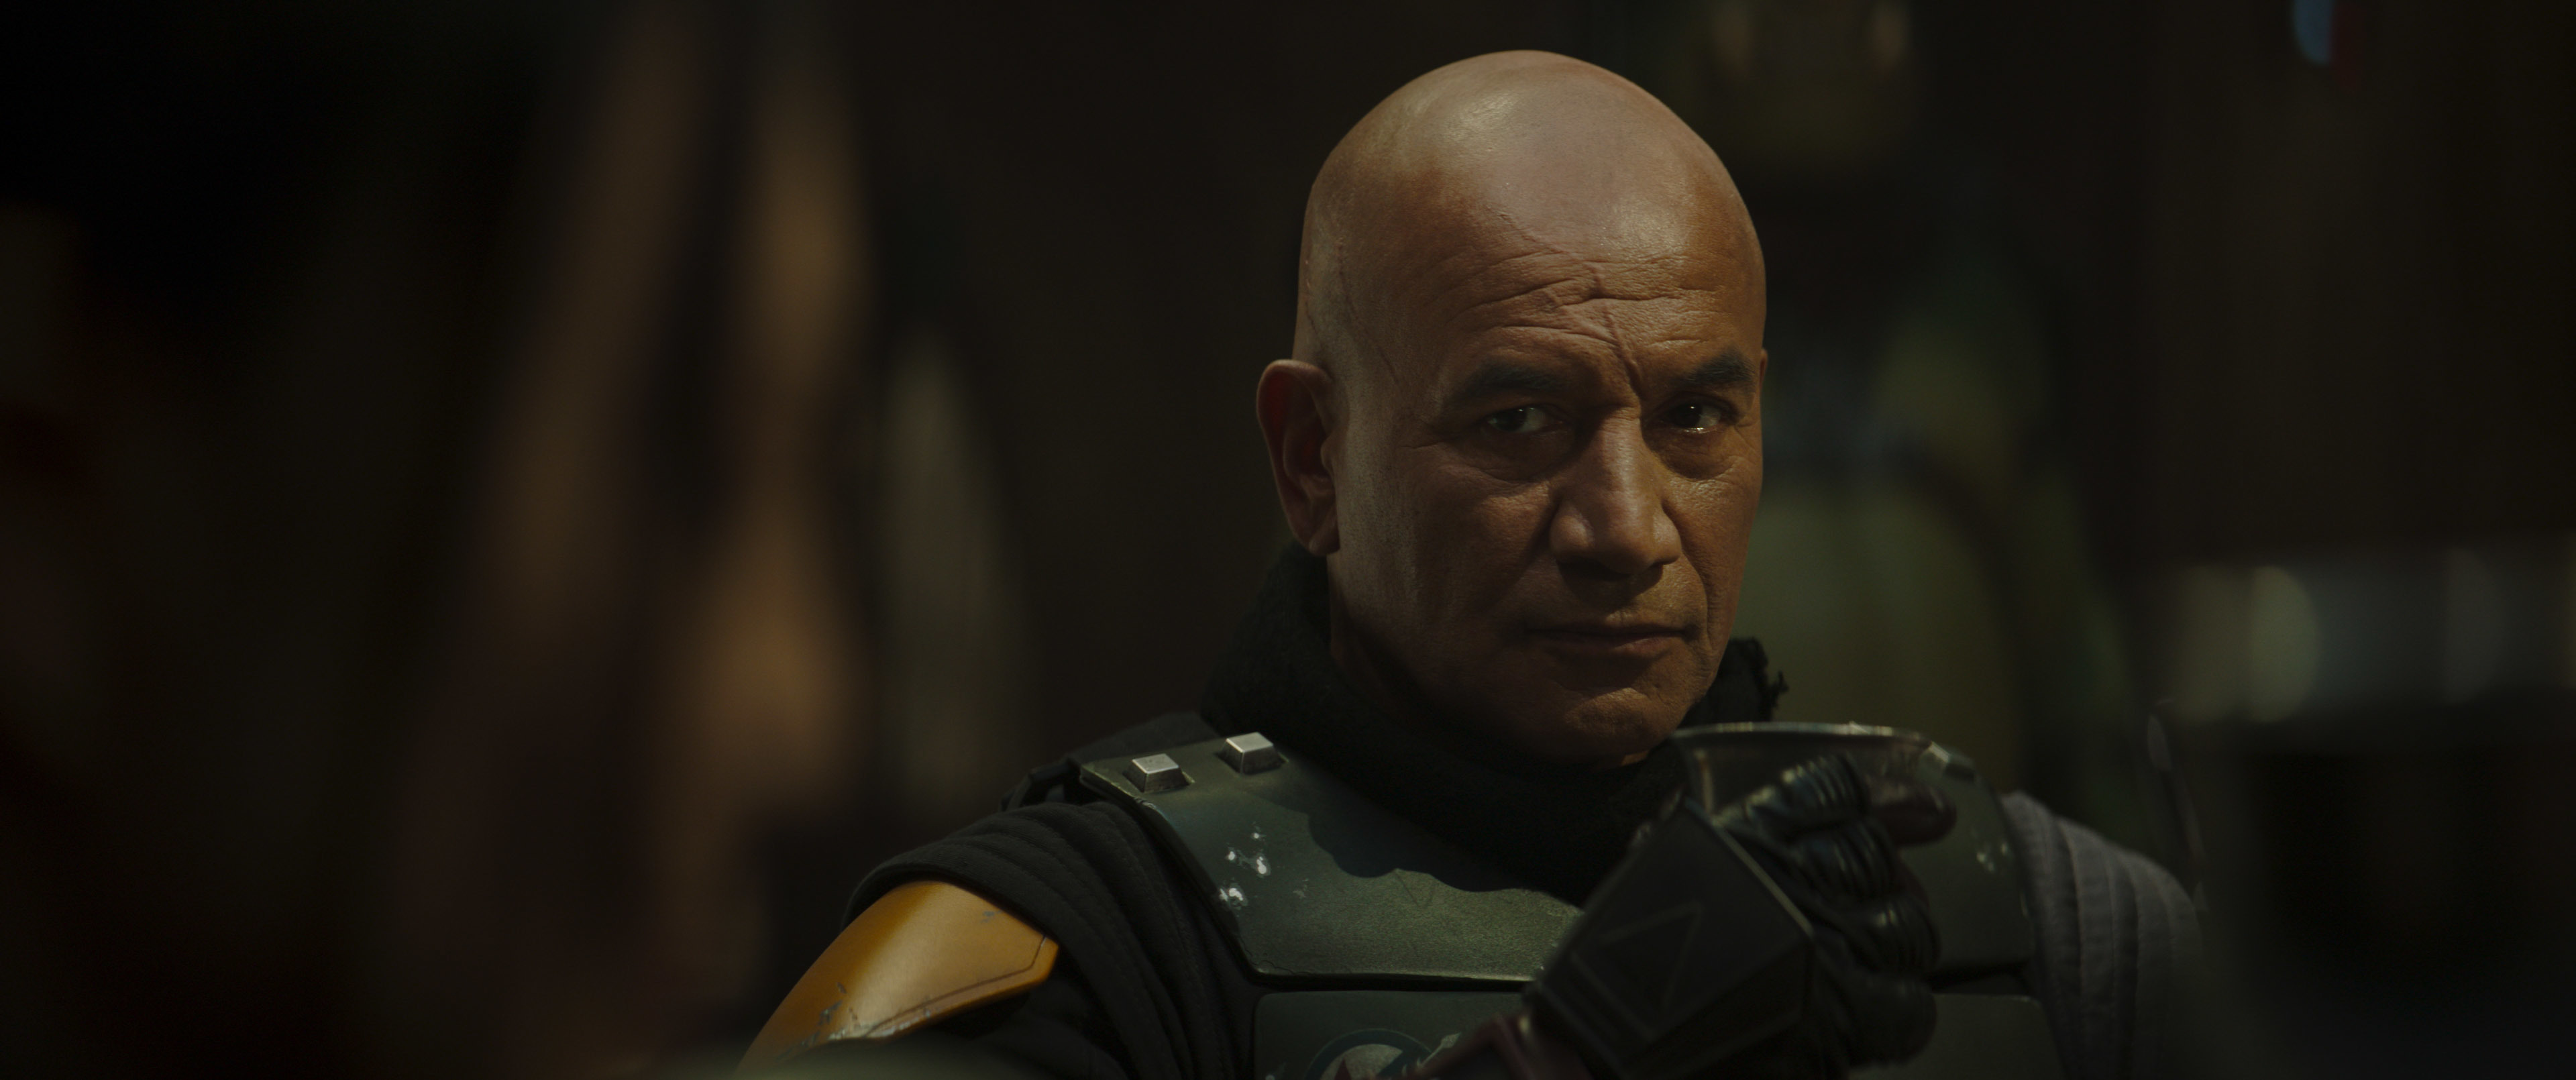 'The Book of Boba Fett' star Temuera Morrison holds a drink